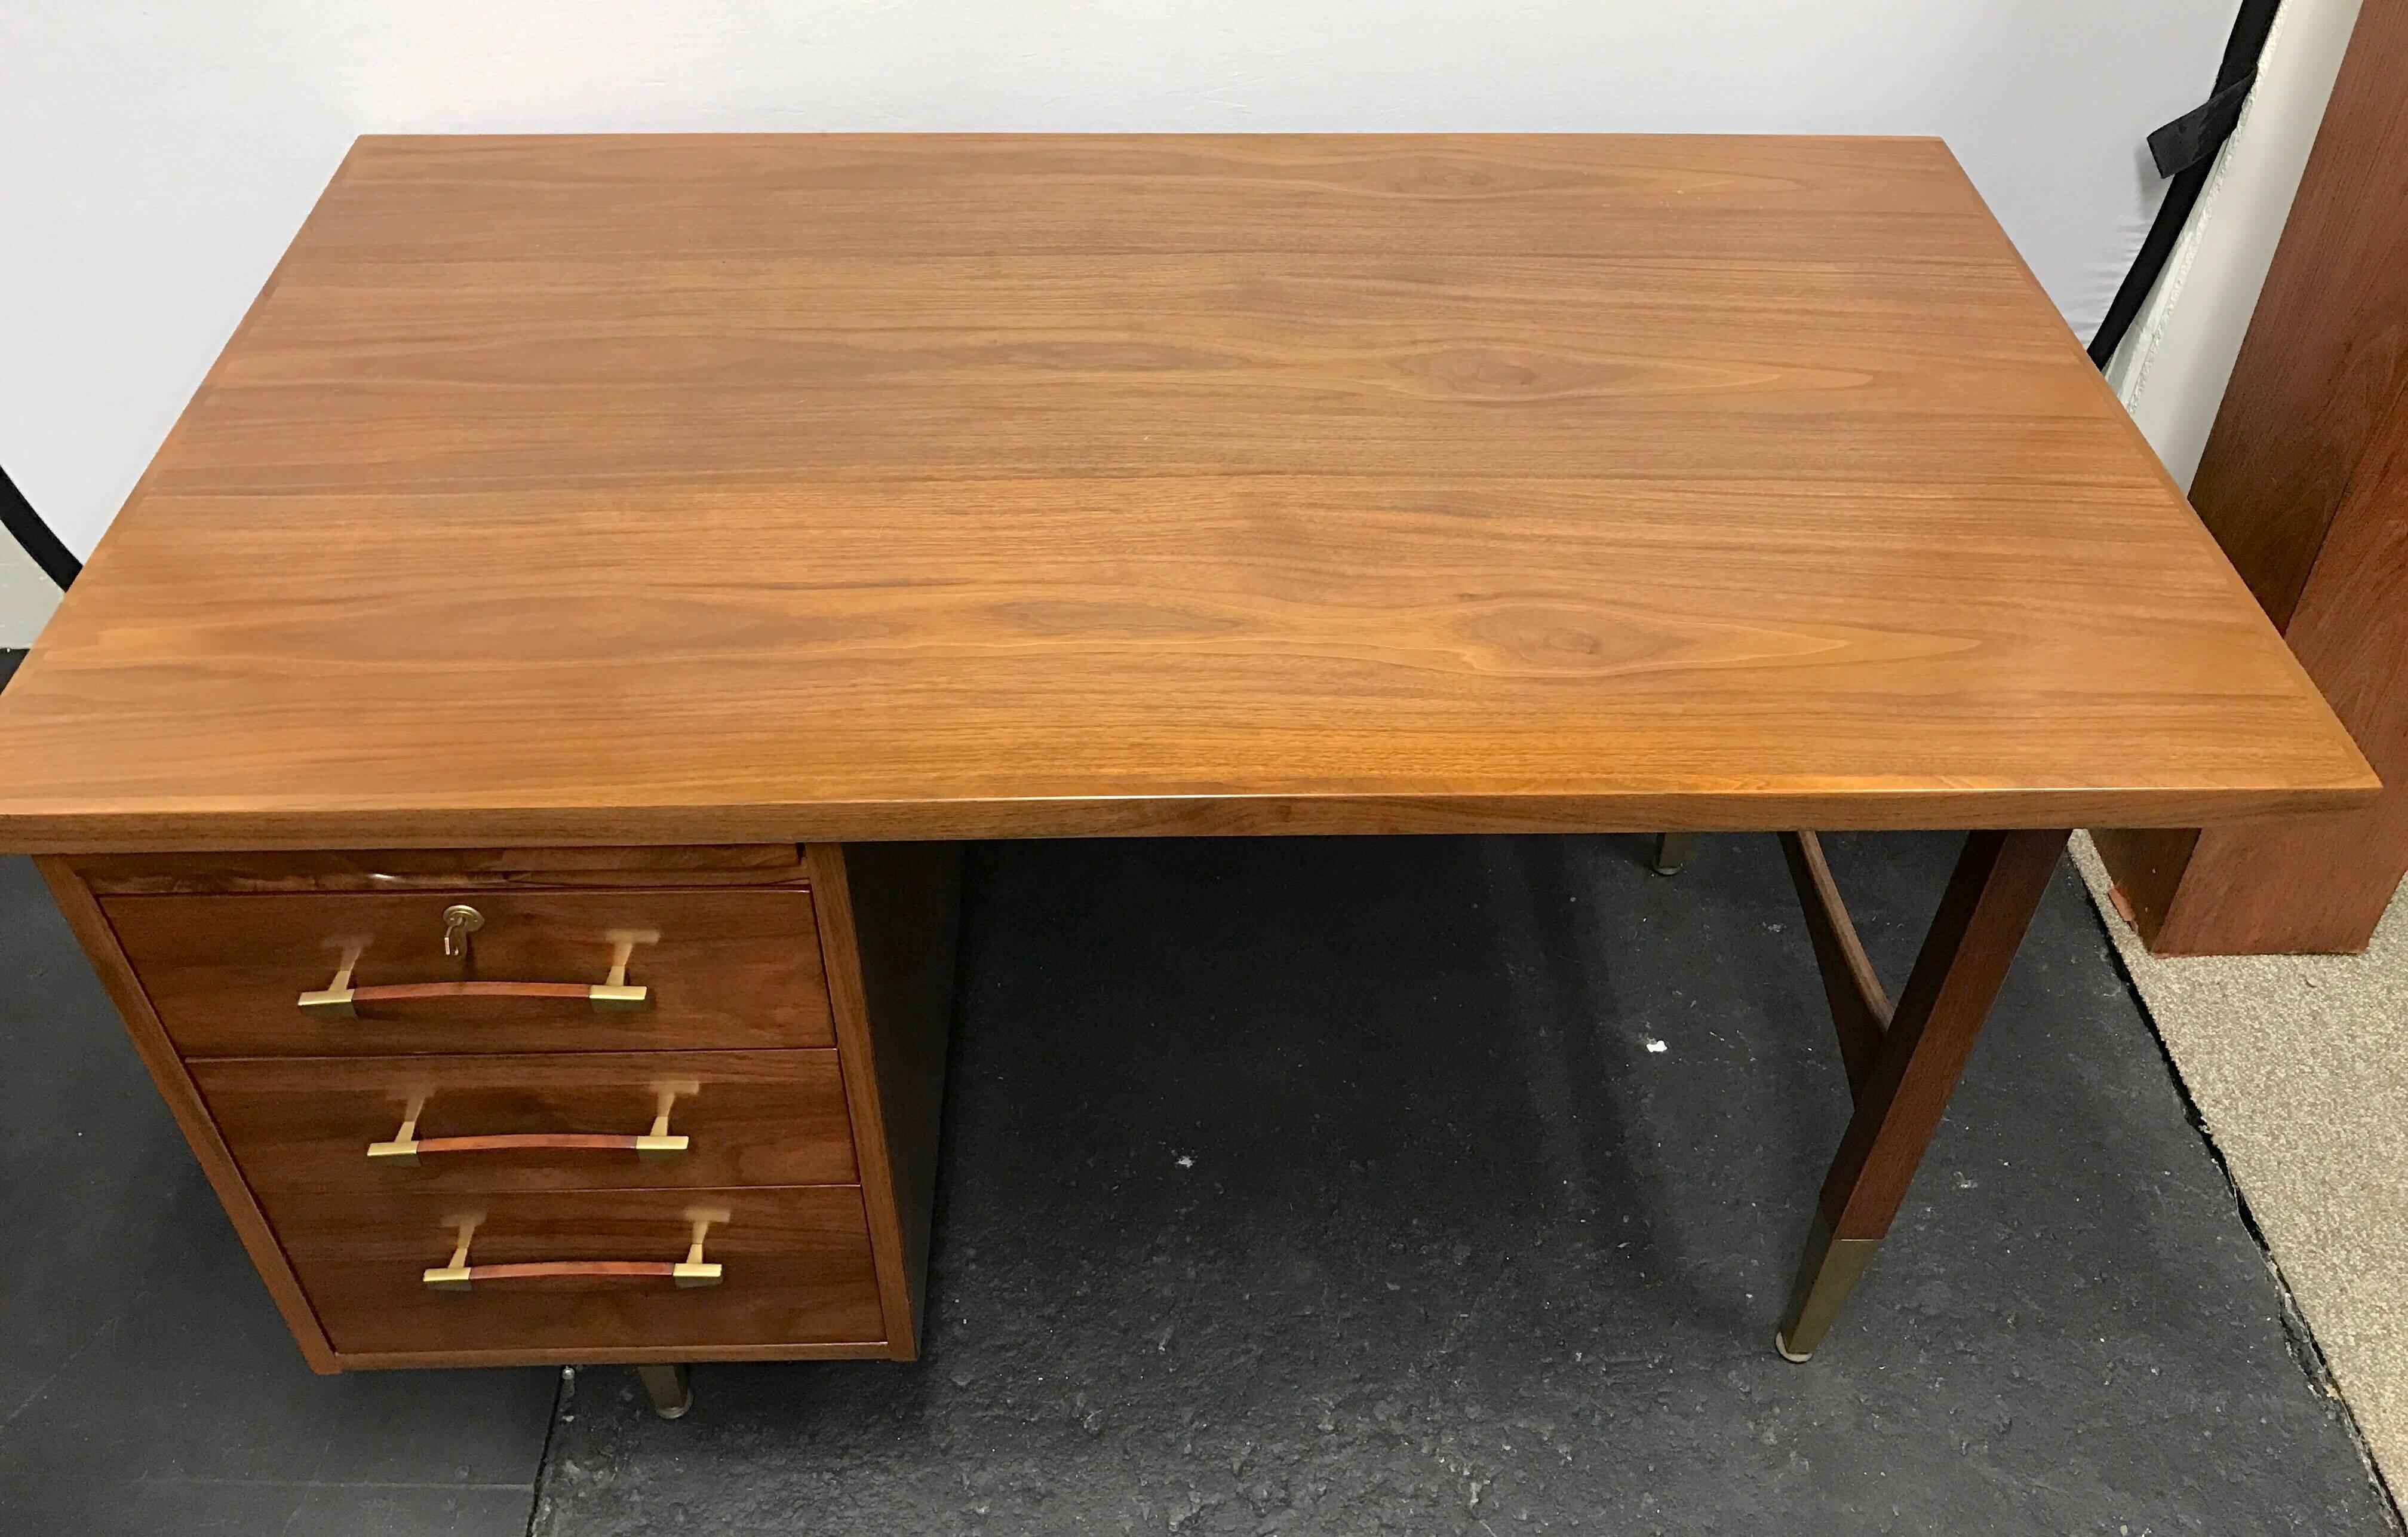 Sleek Danish Mid-Century Modern desk with oiled walnut wood. All original and comes with lock to secure your valuables.